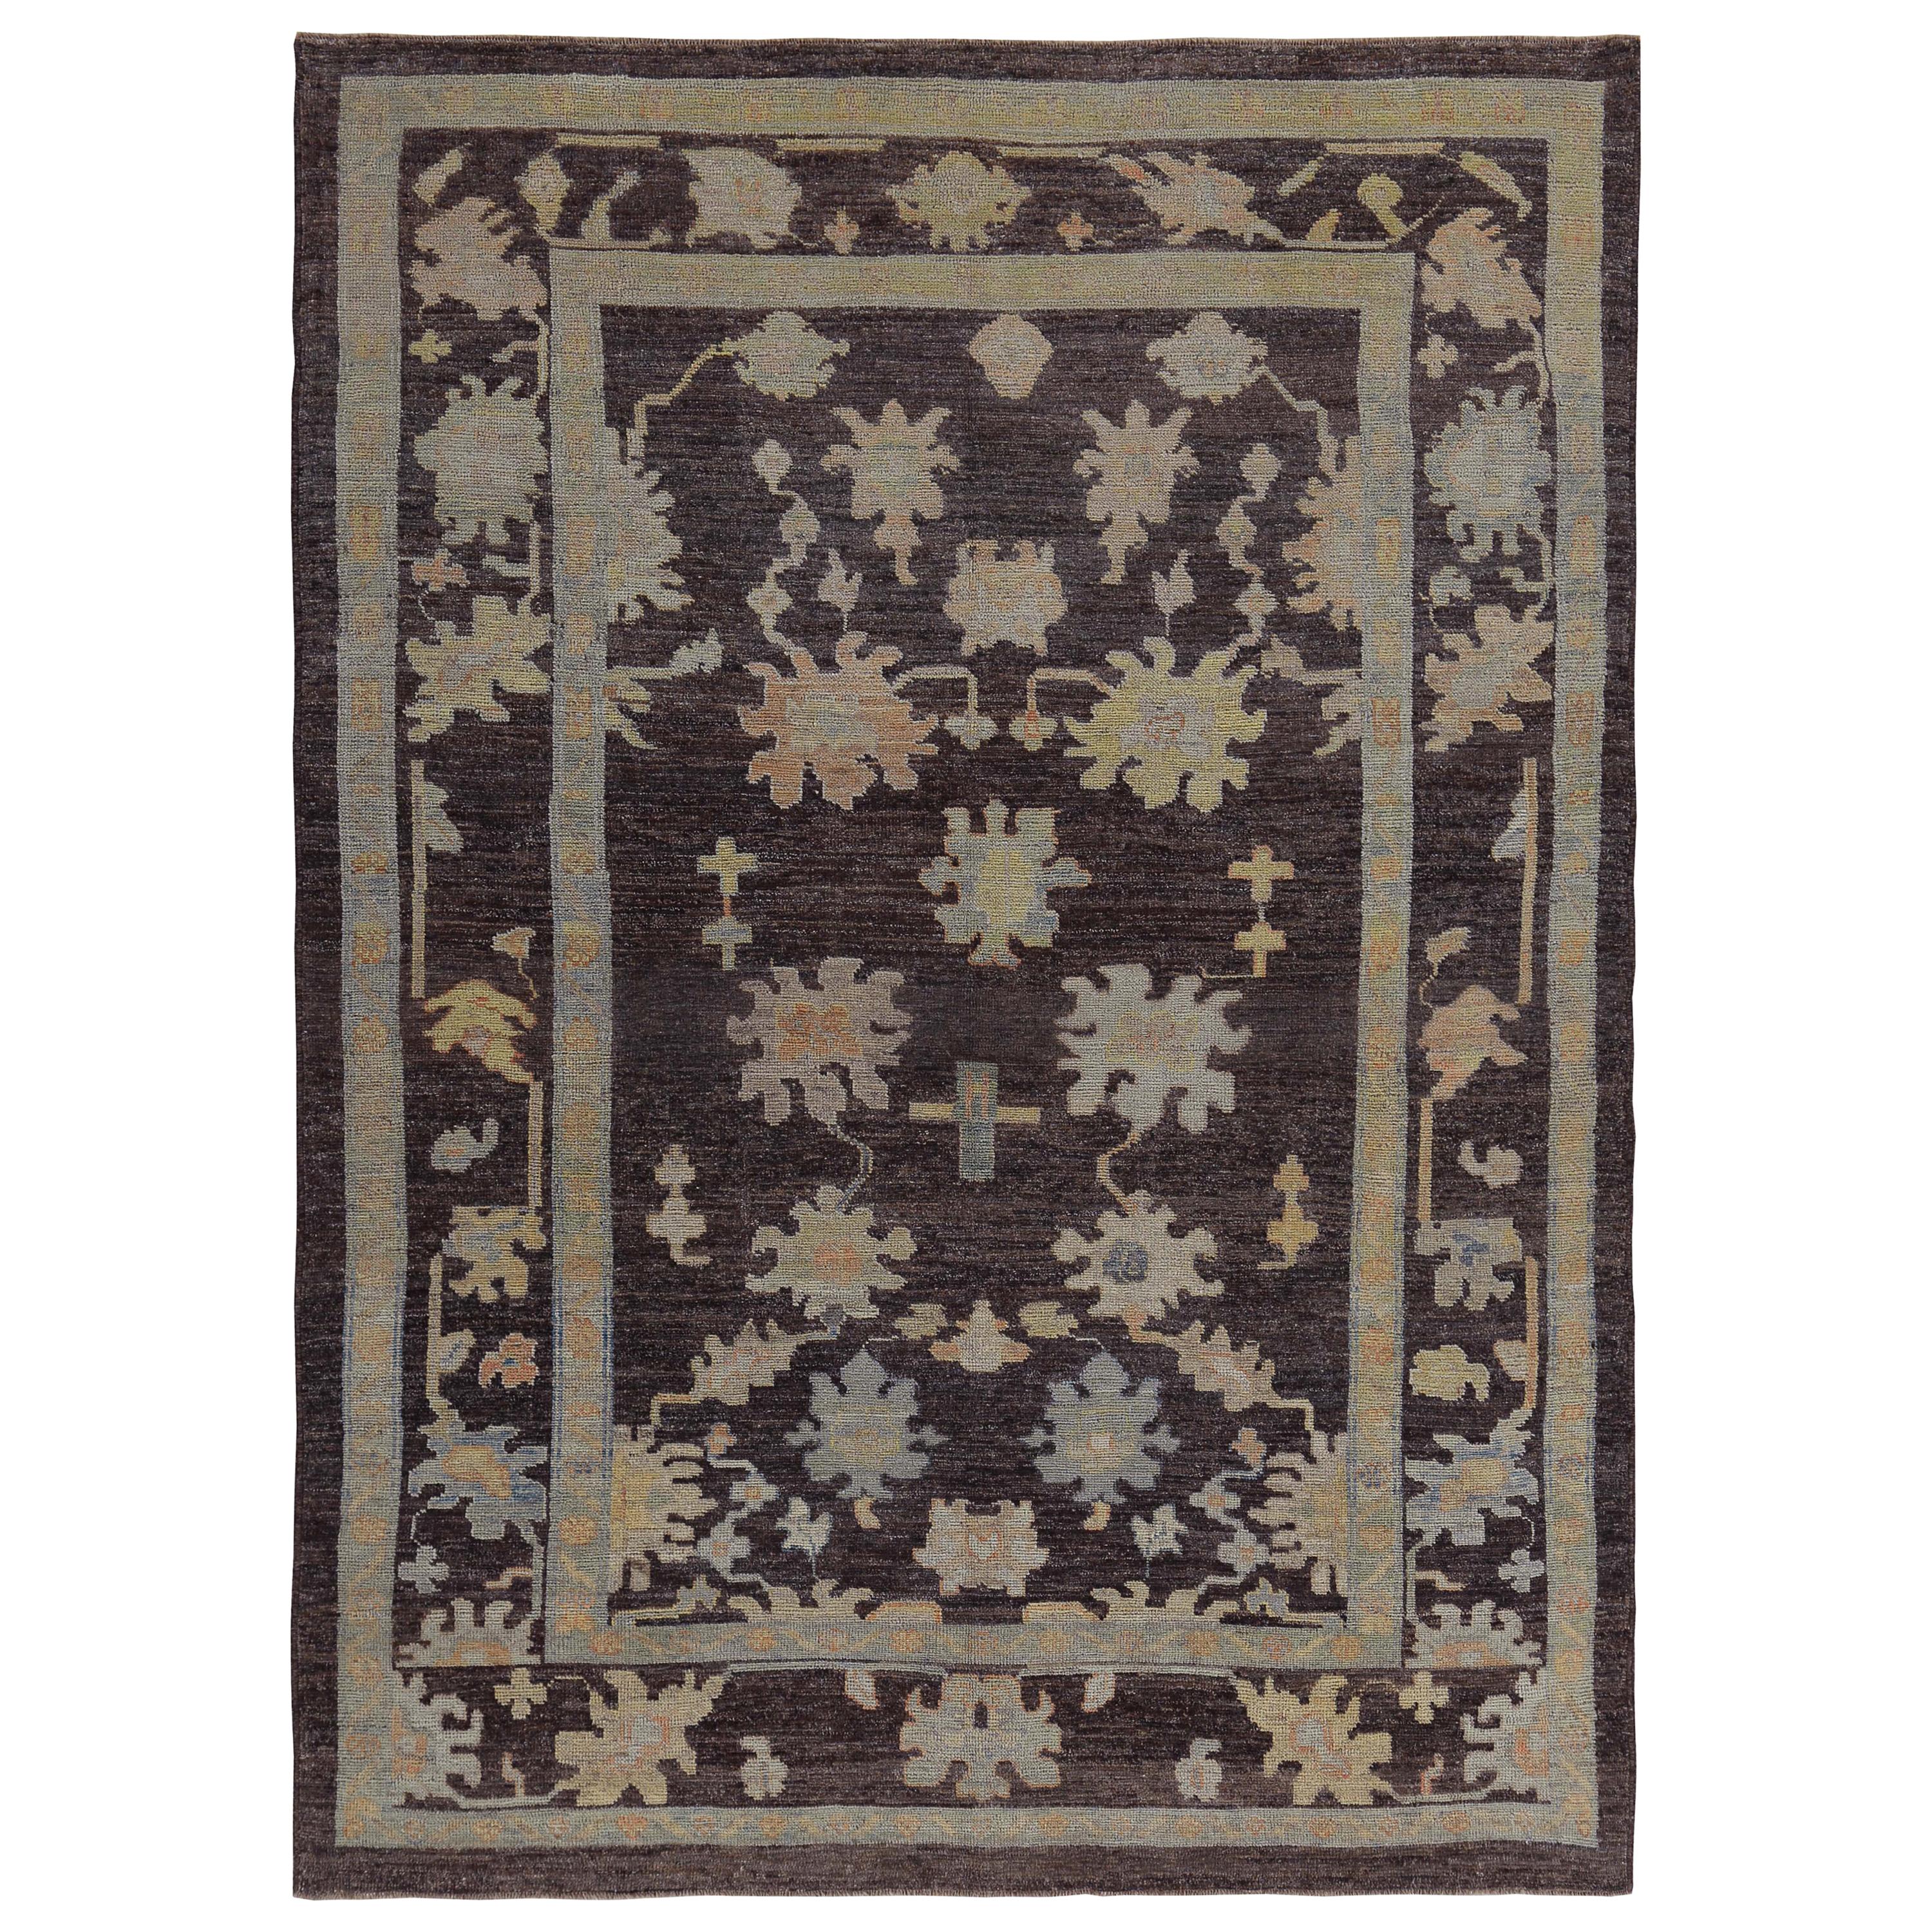 Turkish Oushak Rug with Blue, Orange and Yellow Flower Heads on Brown Field